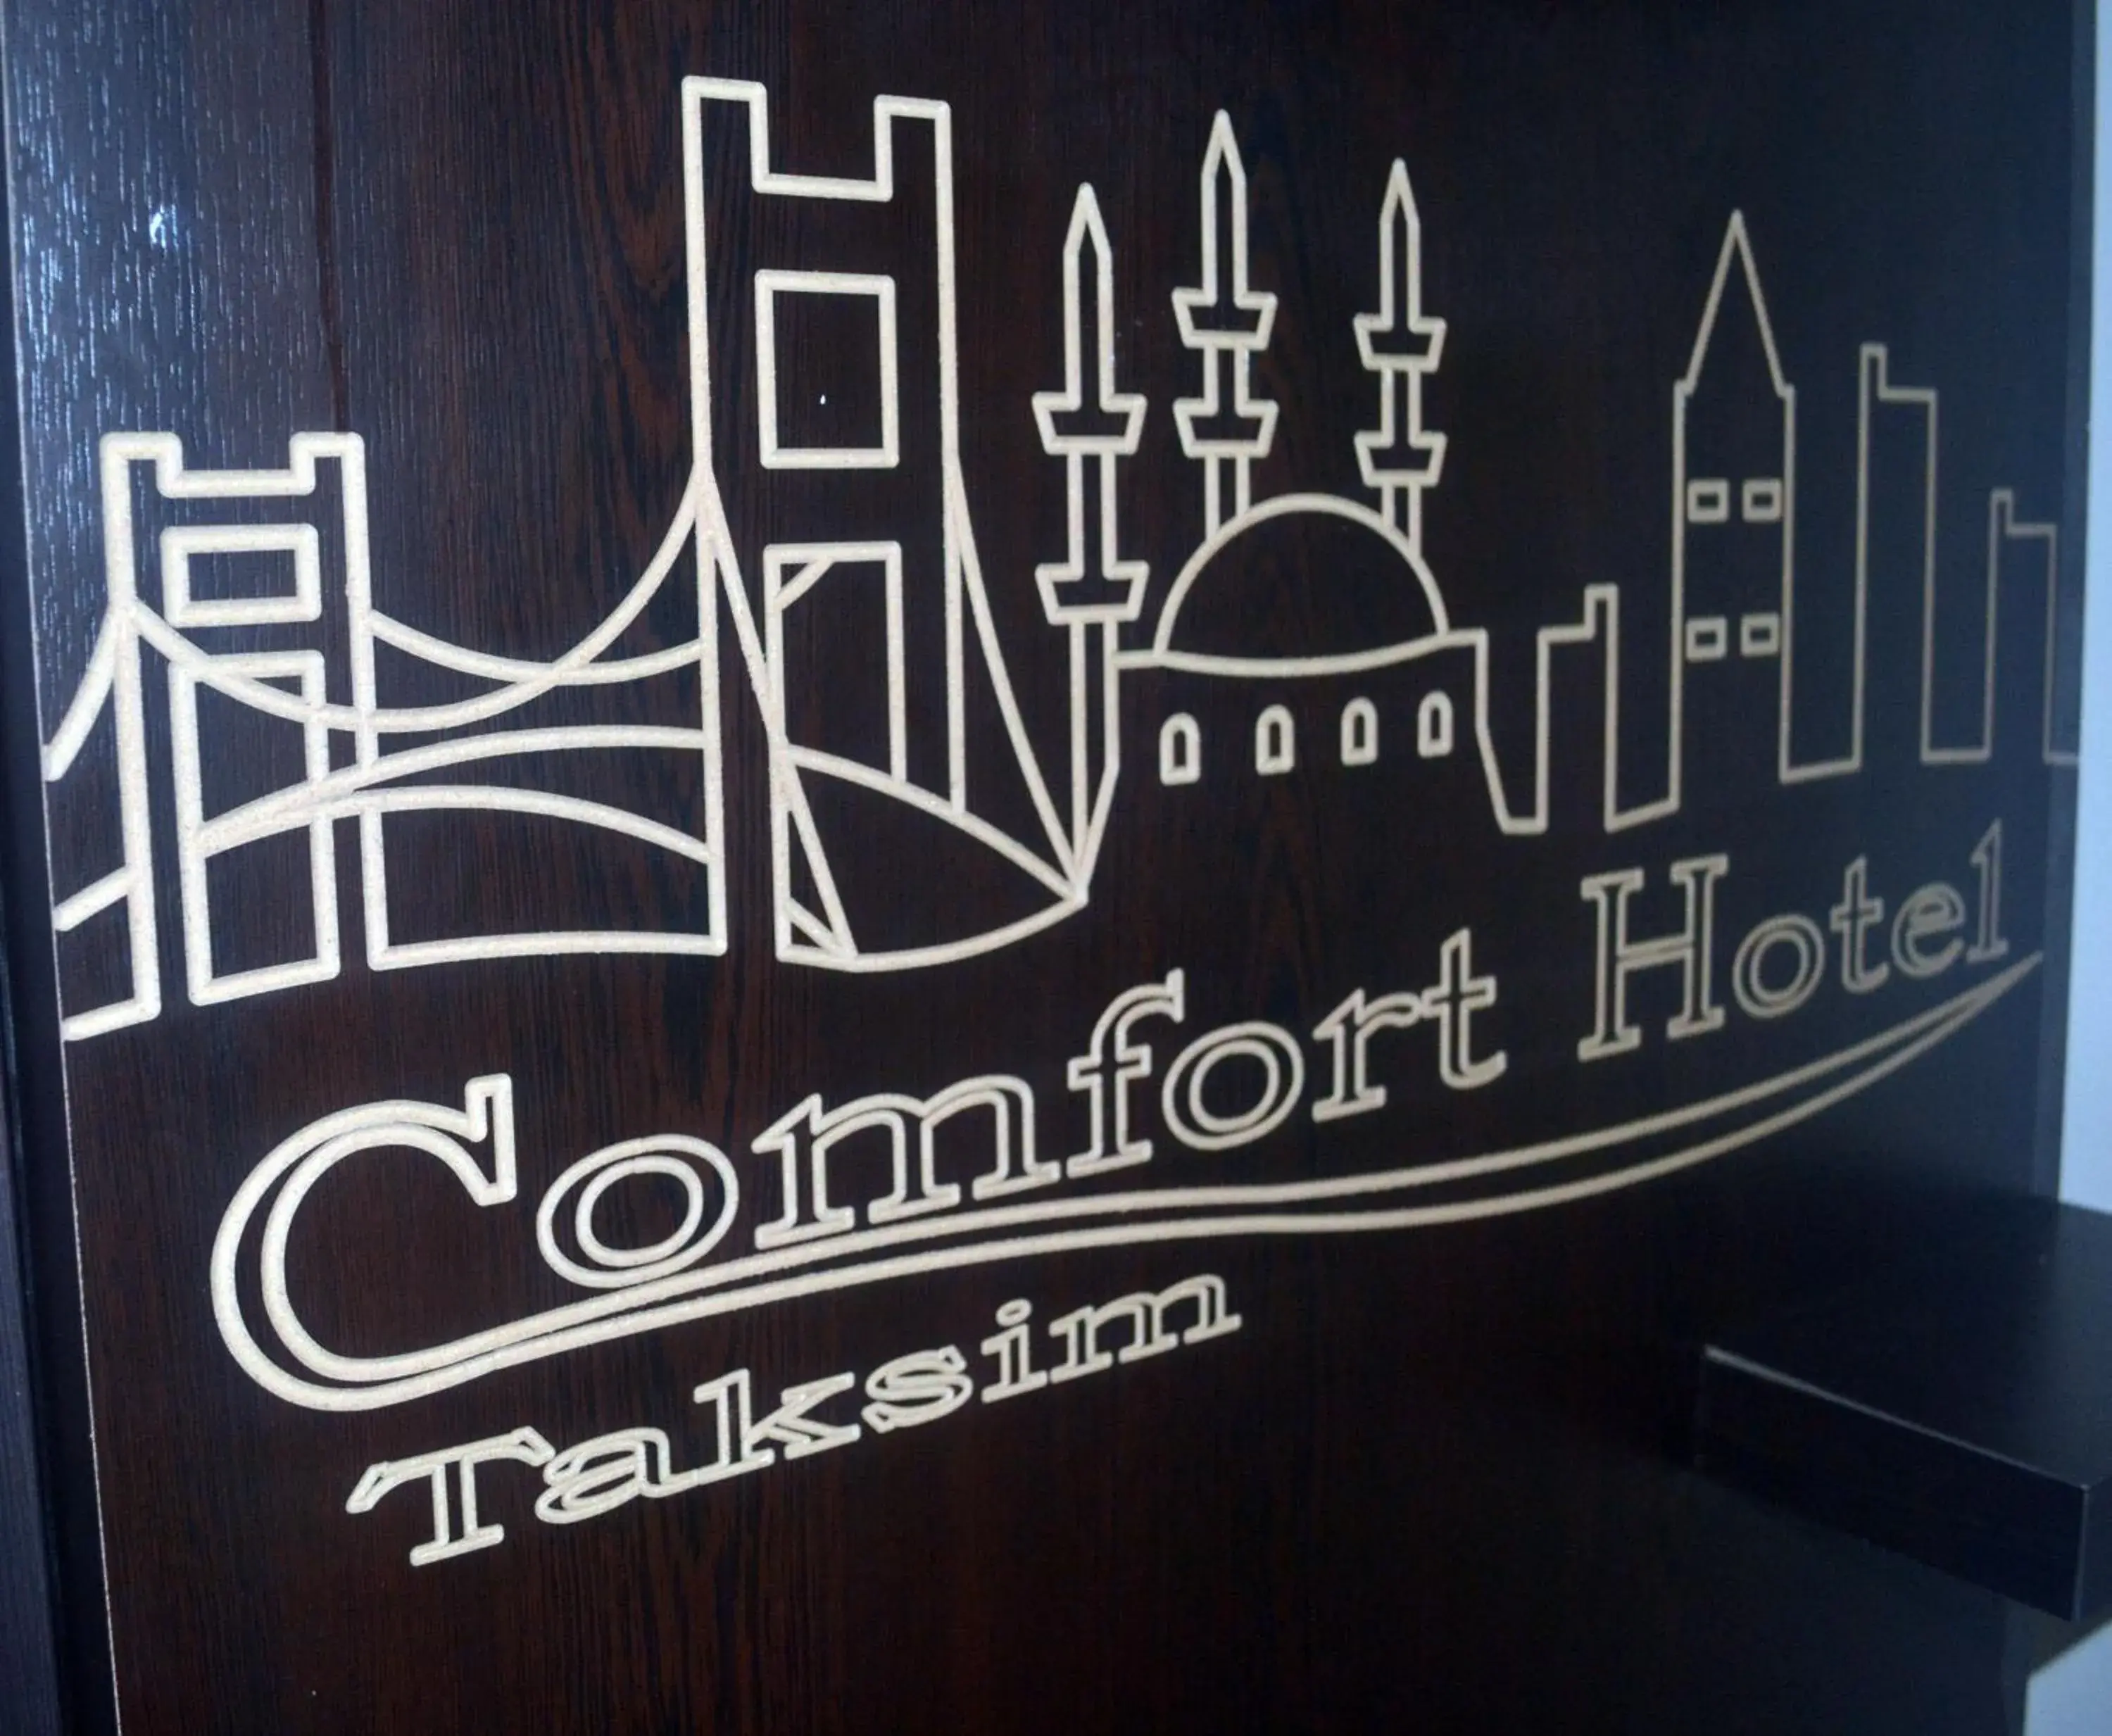 Other in Comfort Hotel Taksim